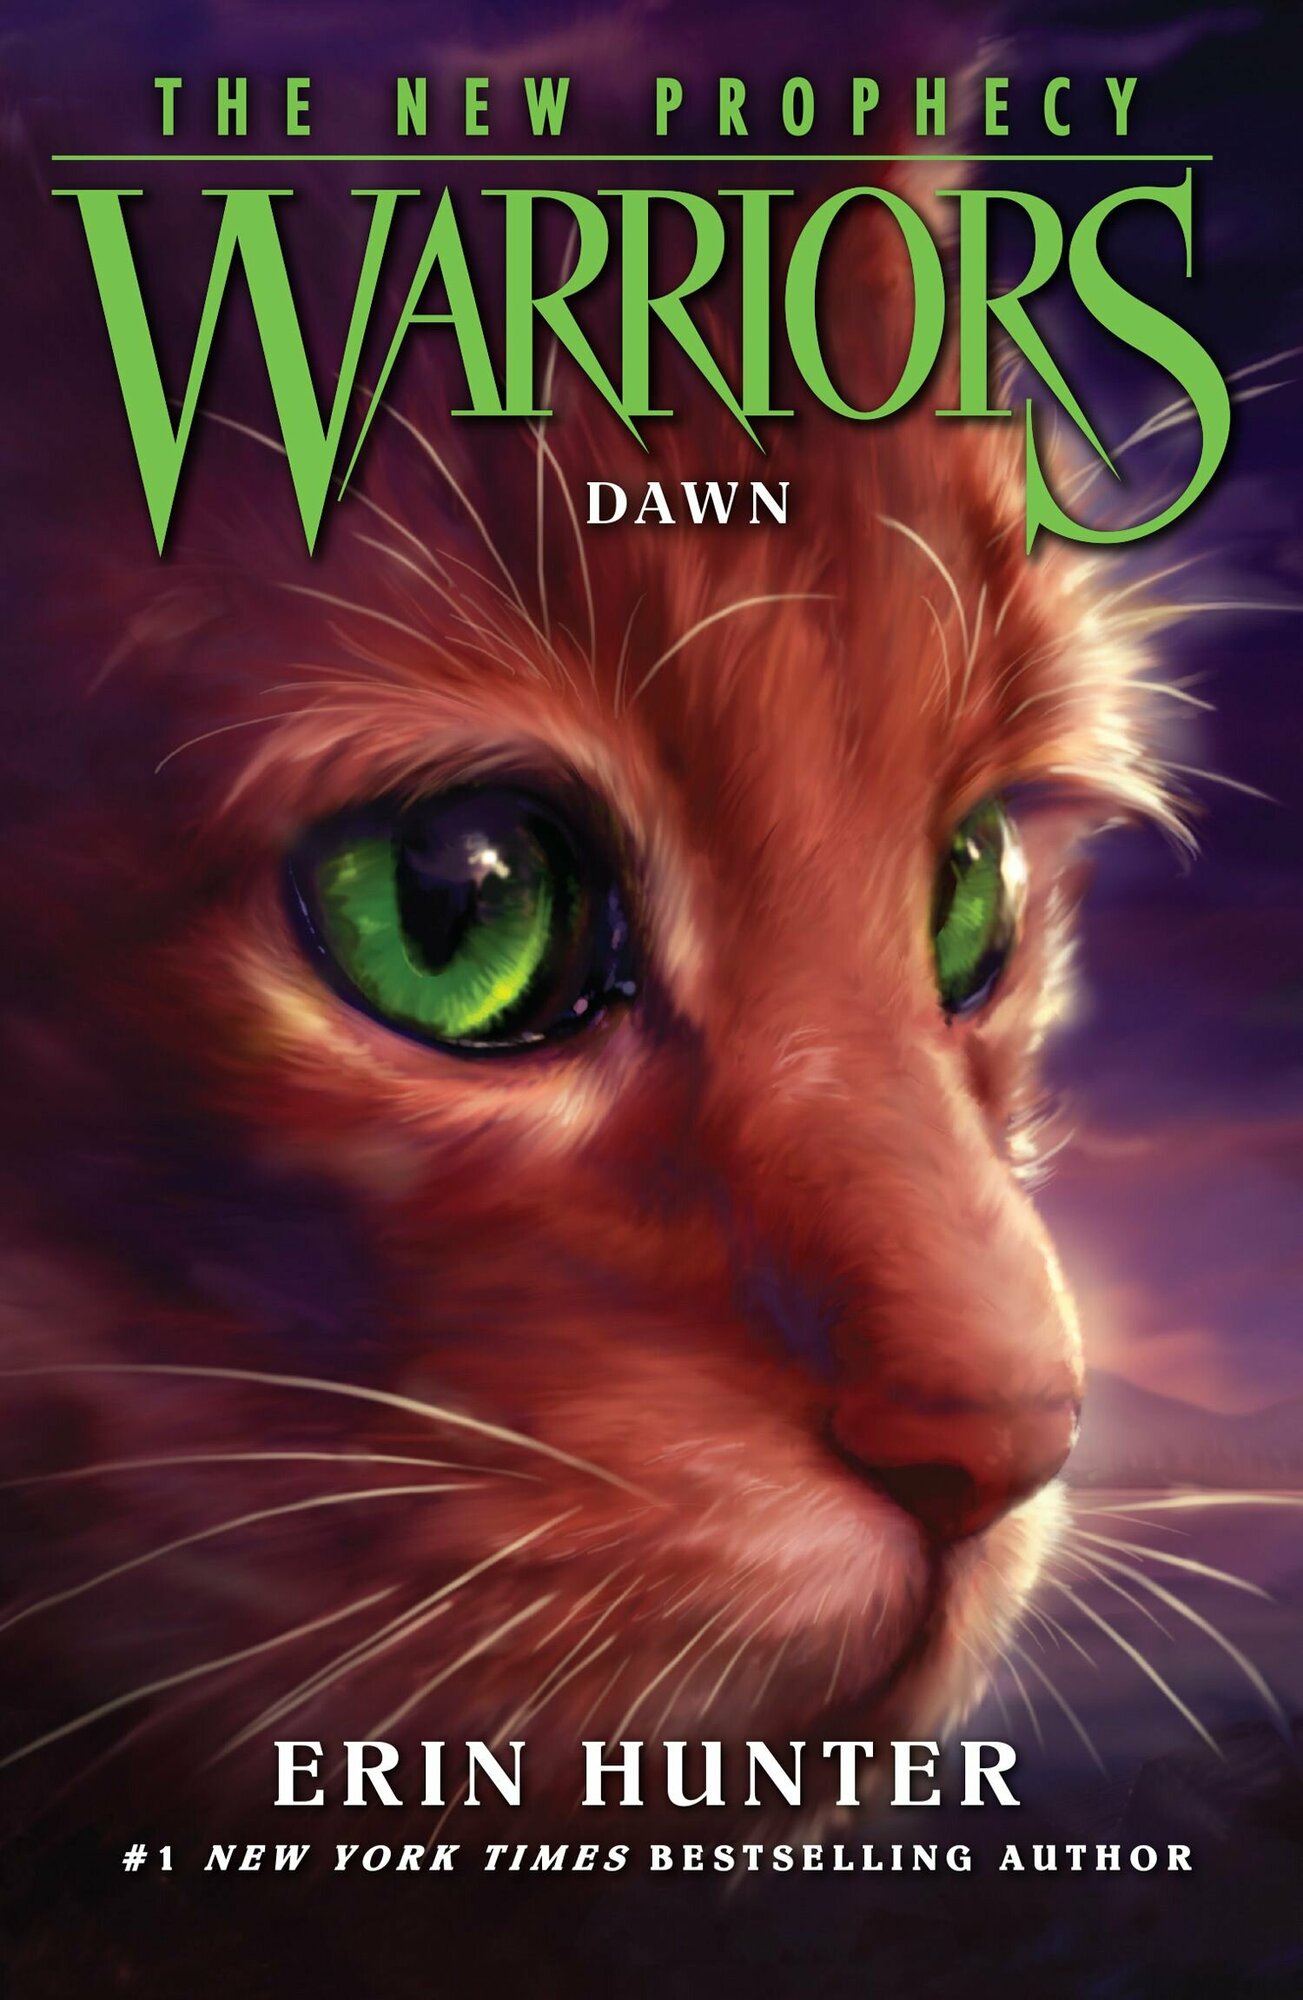 Hunter Erin "Warriors: the New Prophecy: Dawn"